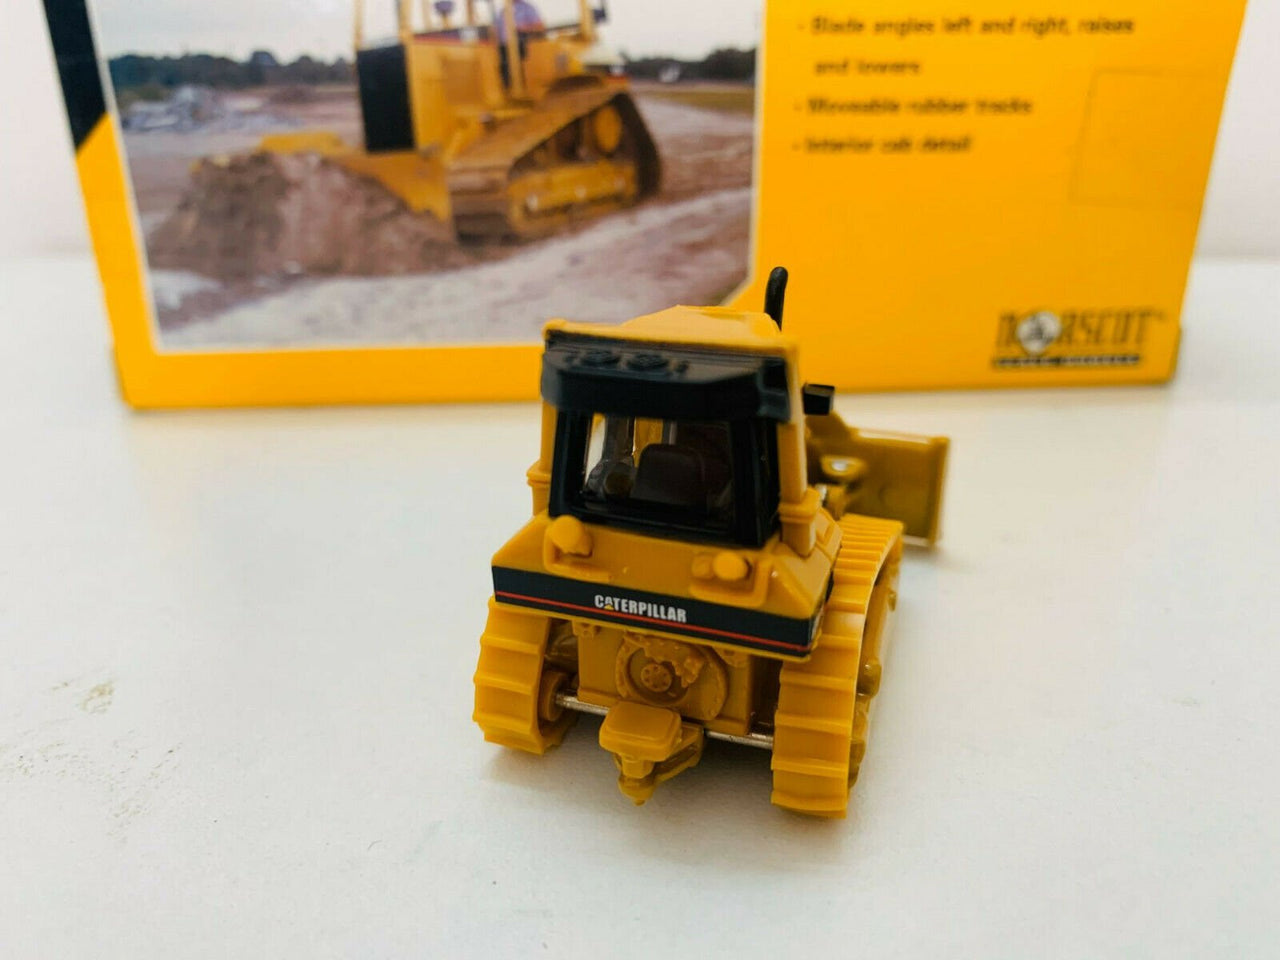 55108 Caterpillar D5M Crawler Tractor Scale 1:87 (Discontinued Model)